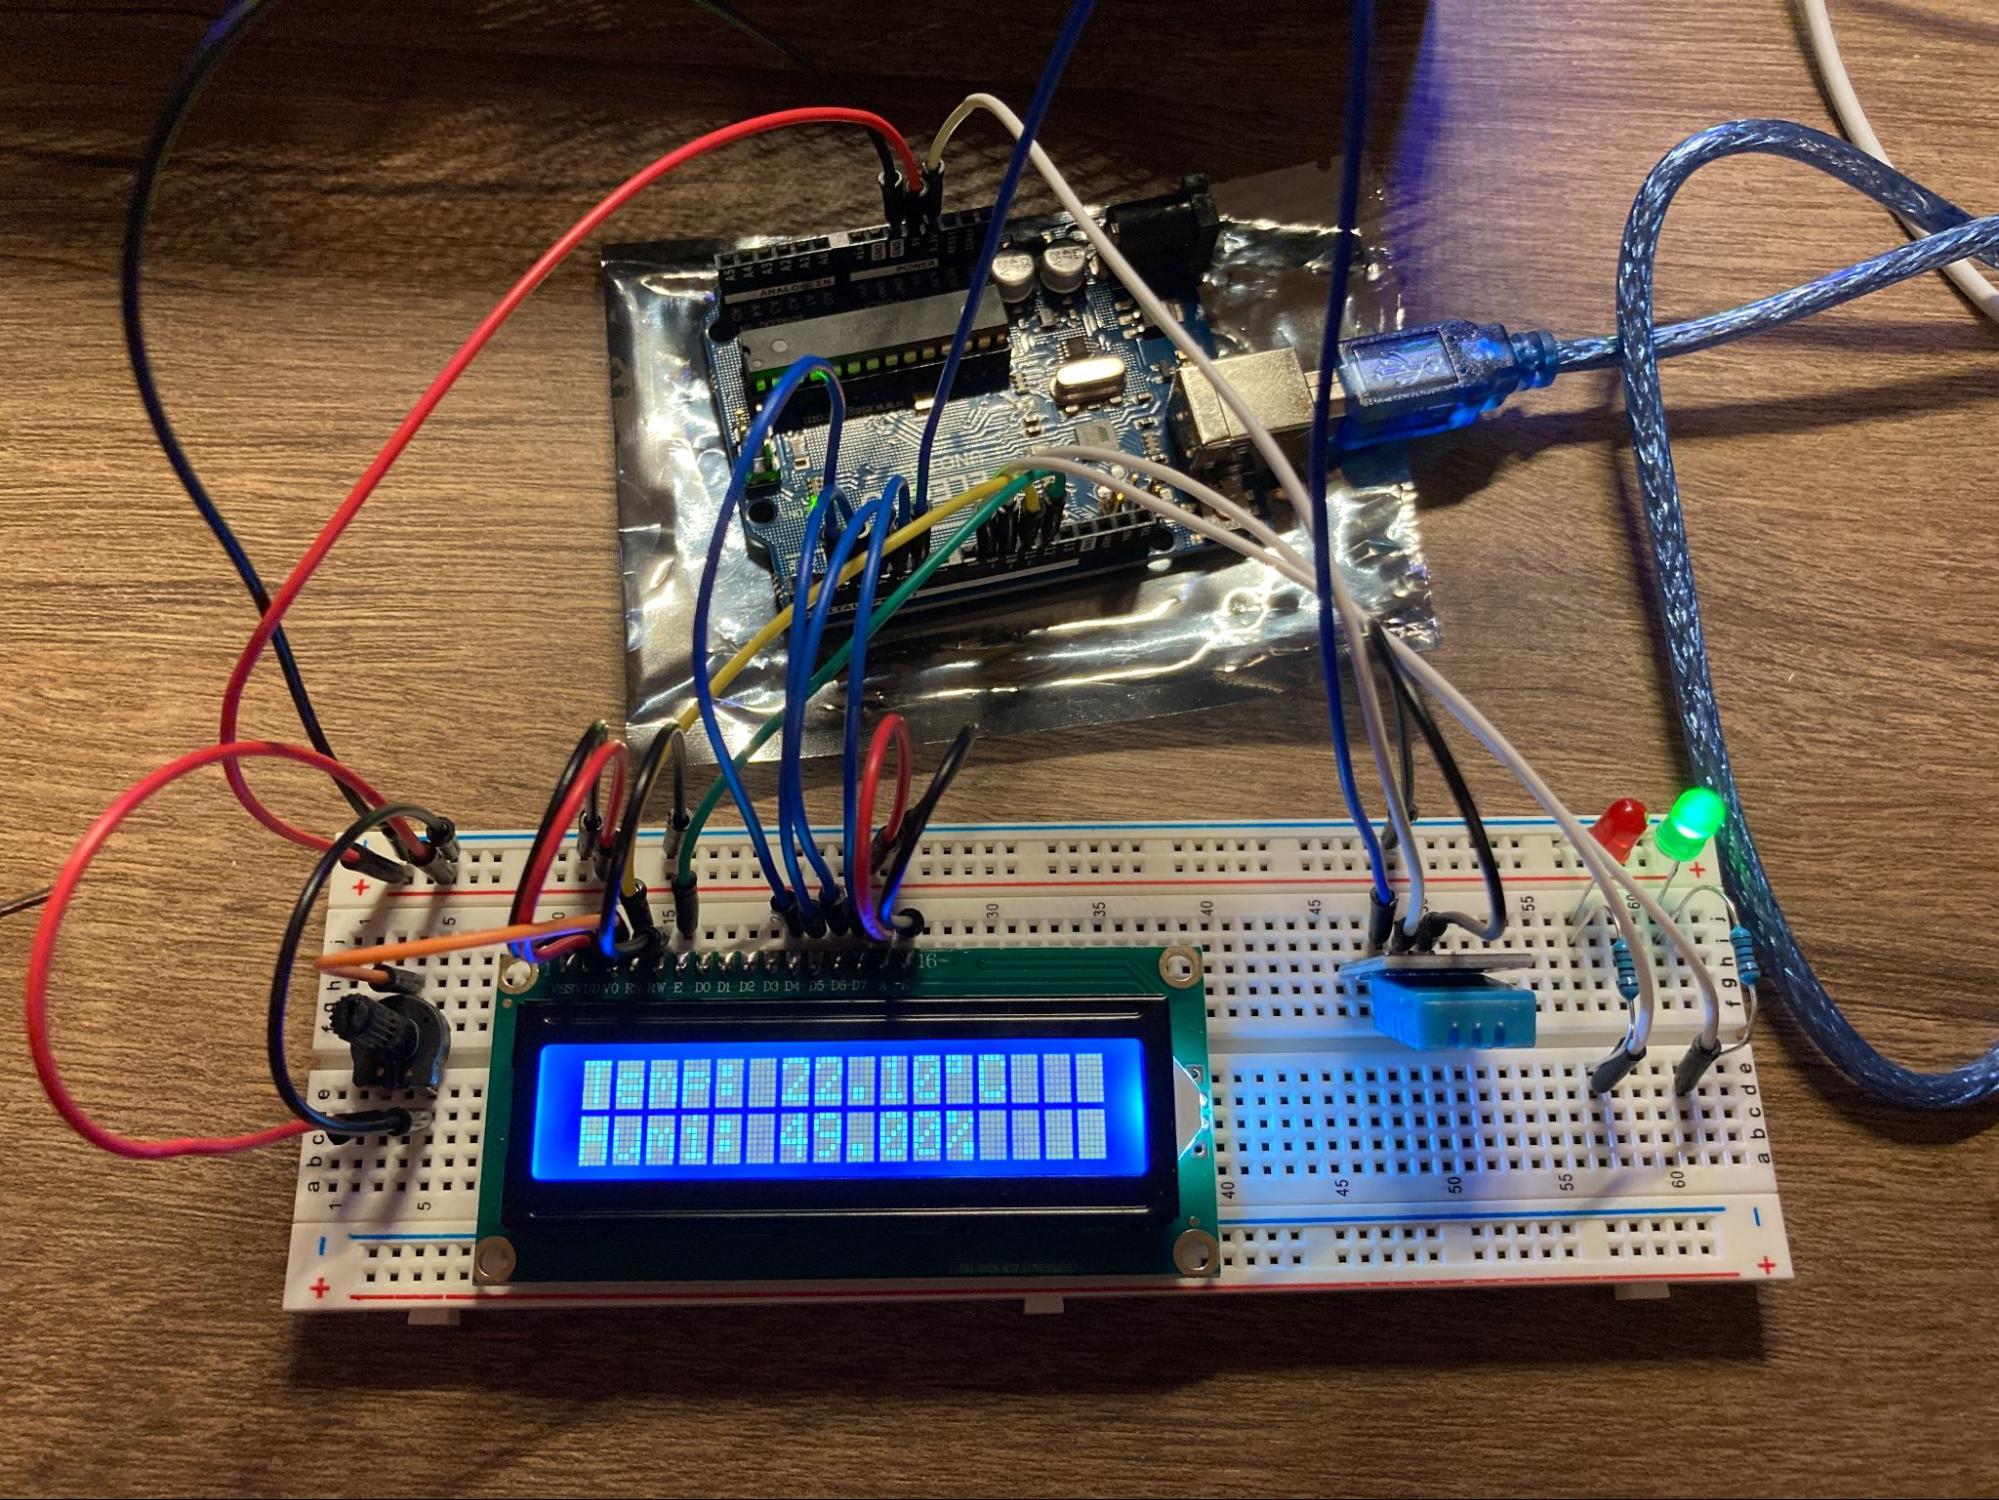 Arduino setup with a temperature and humidity sensor sending output to a display